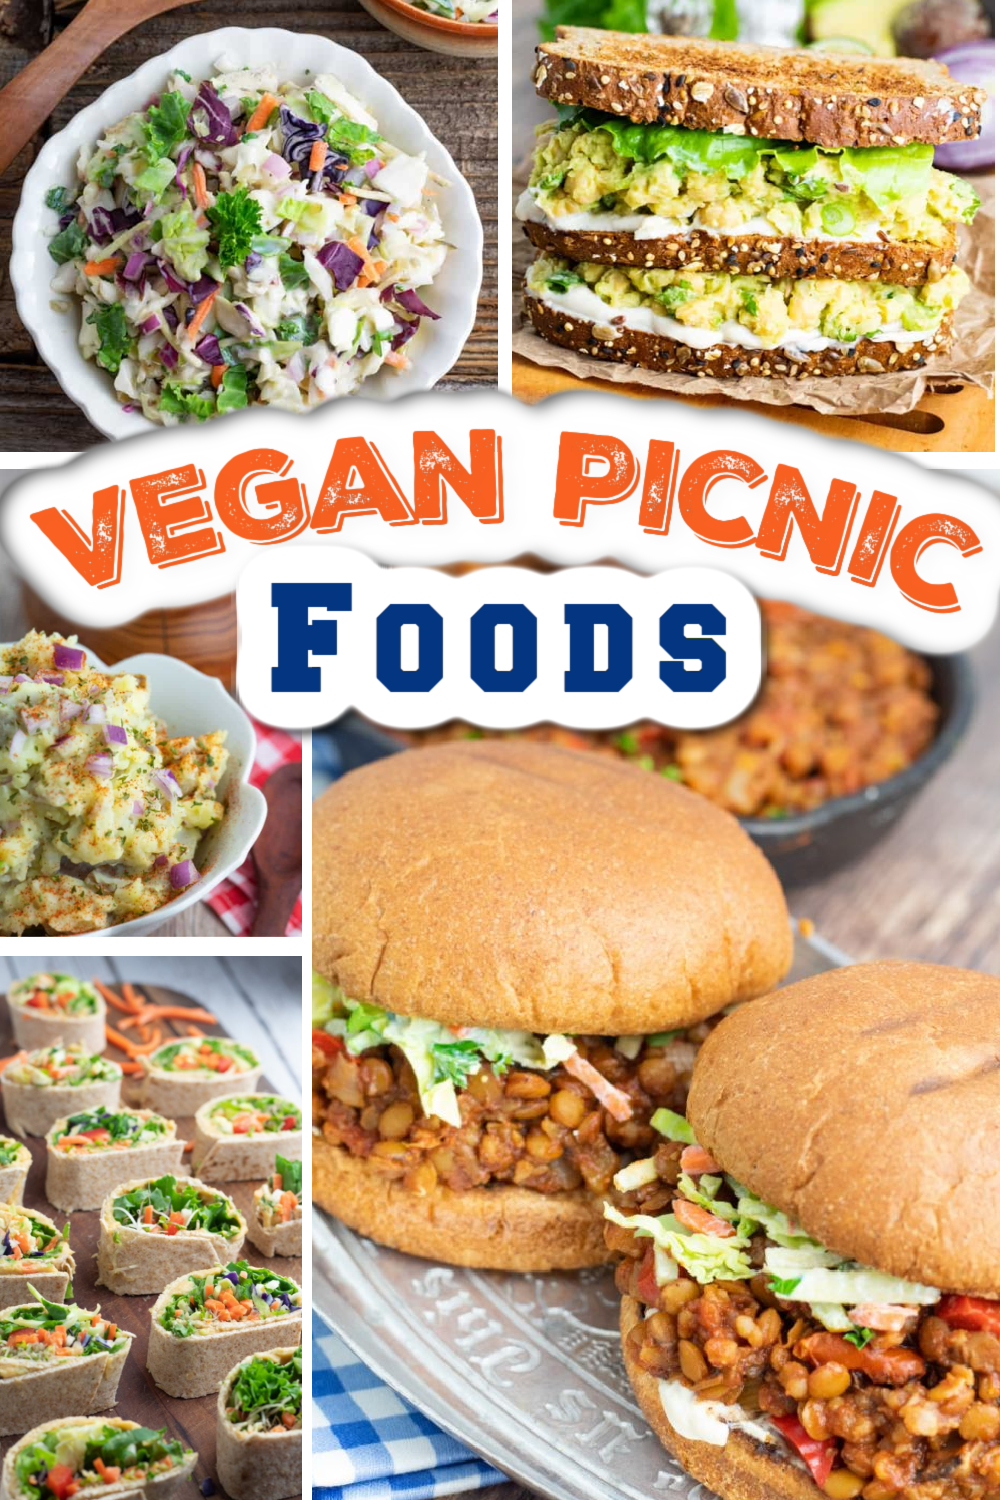 What is a vegetarian picnic?